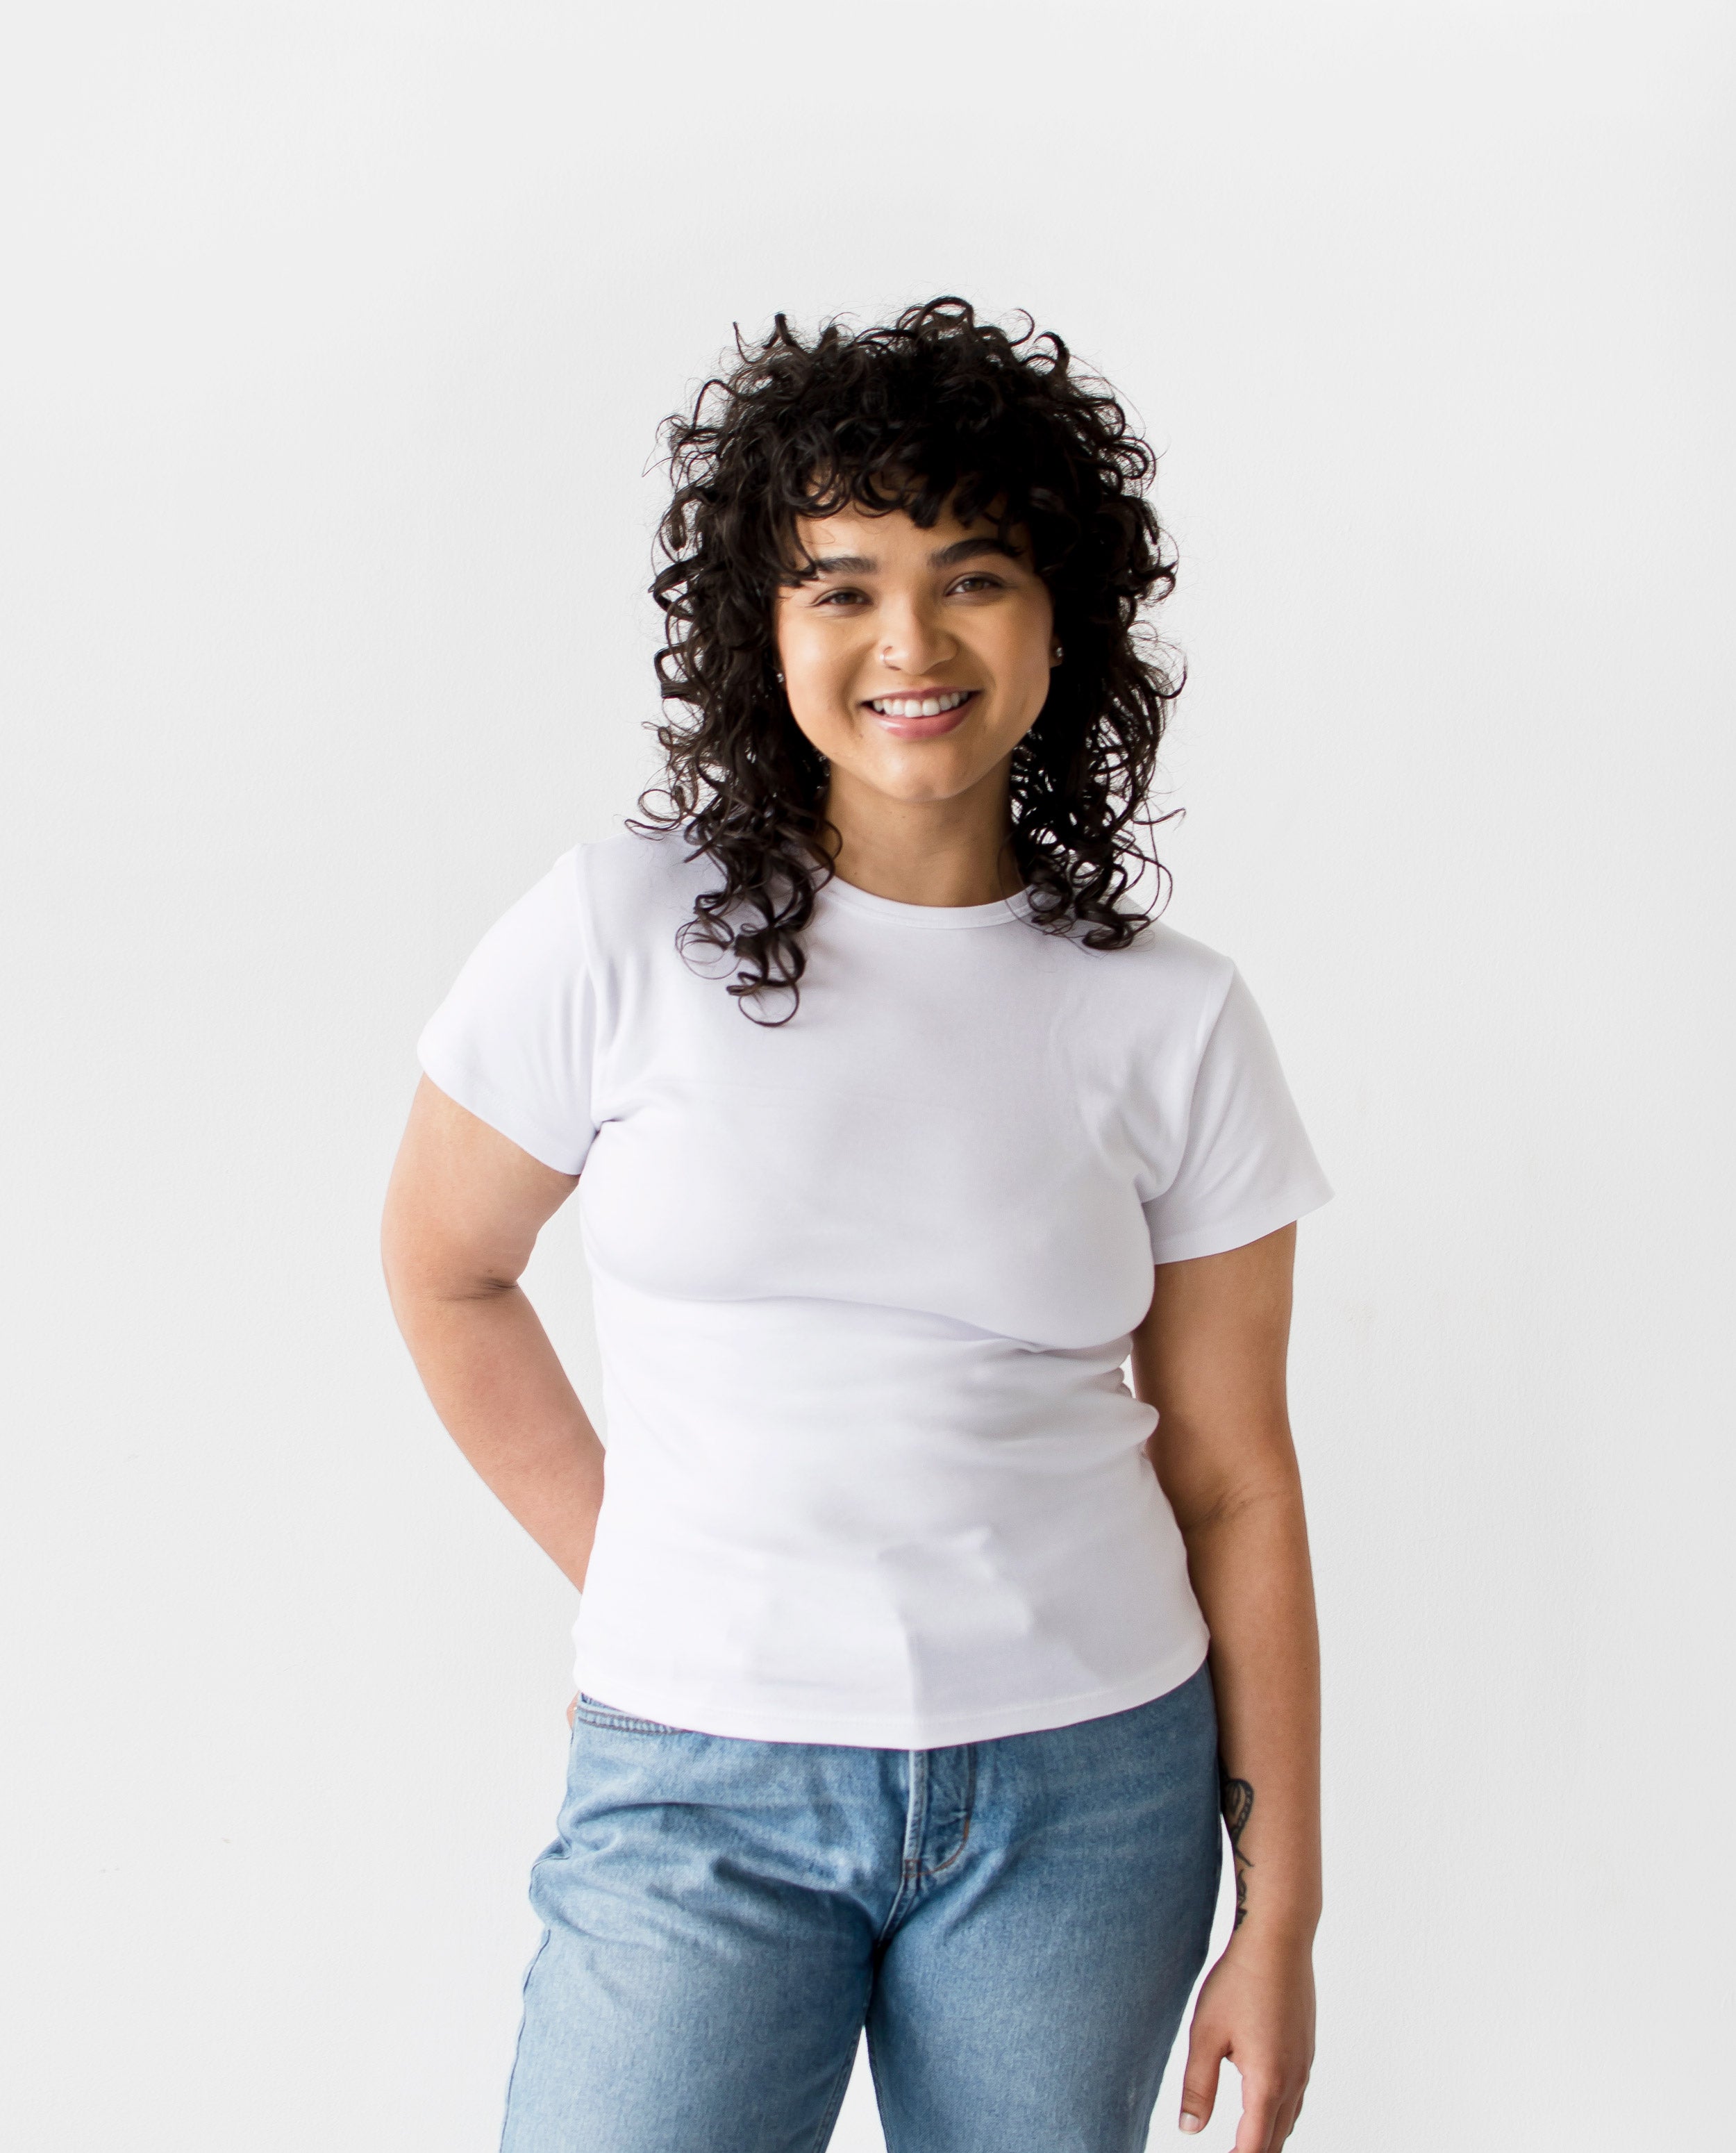 The Babe Tee in White | FRANC Sustainable Clothing